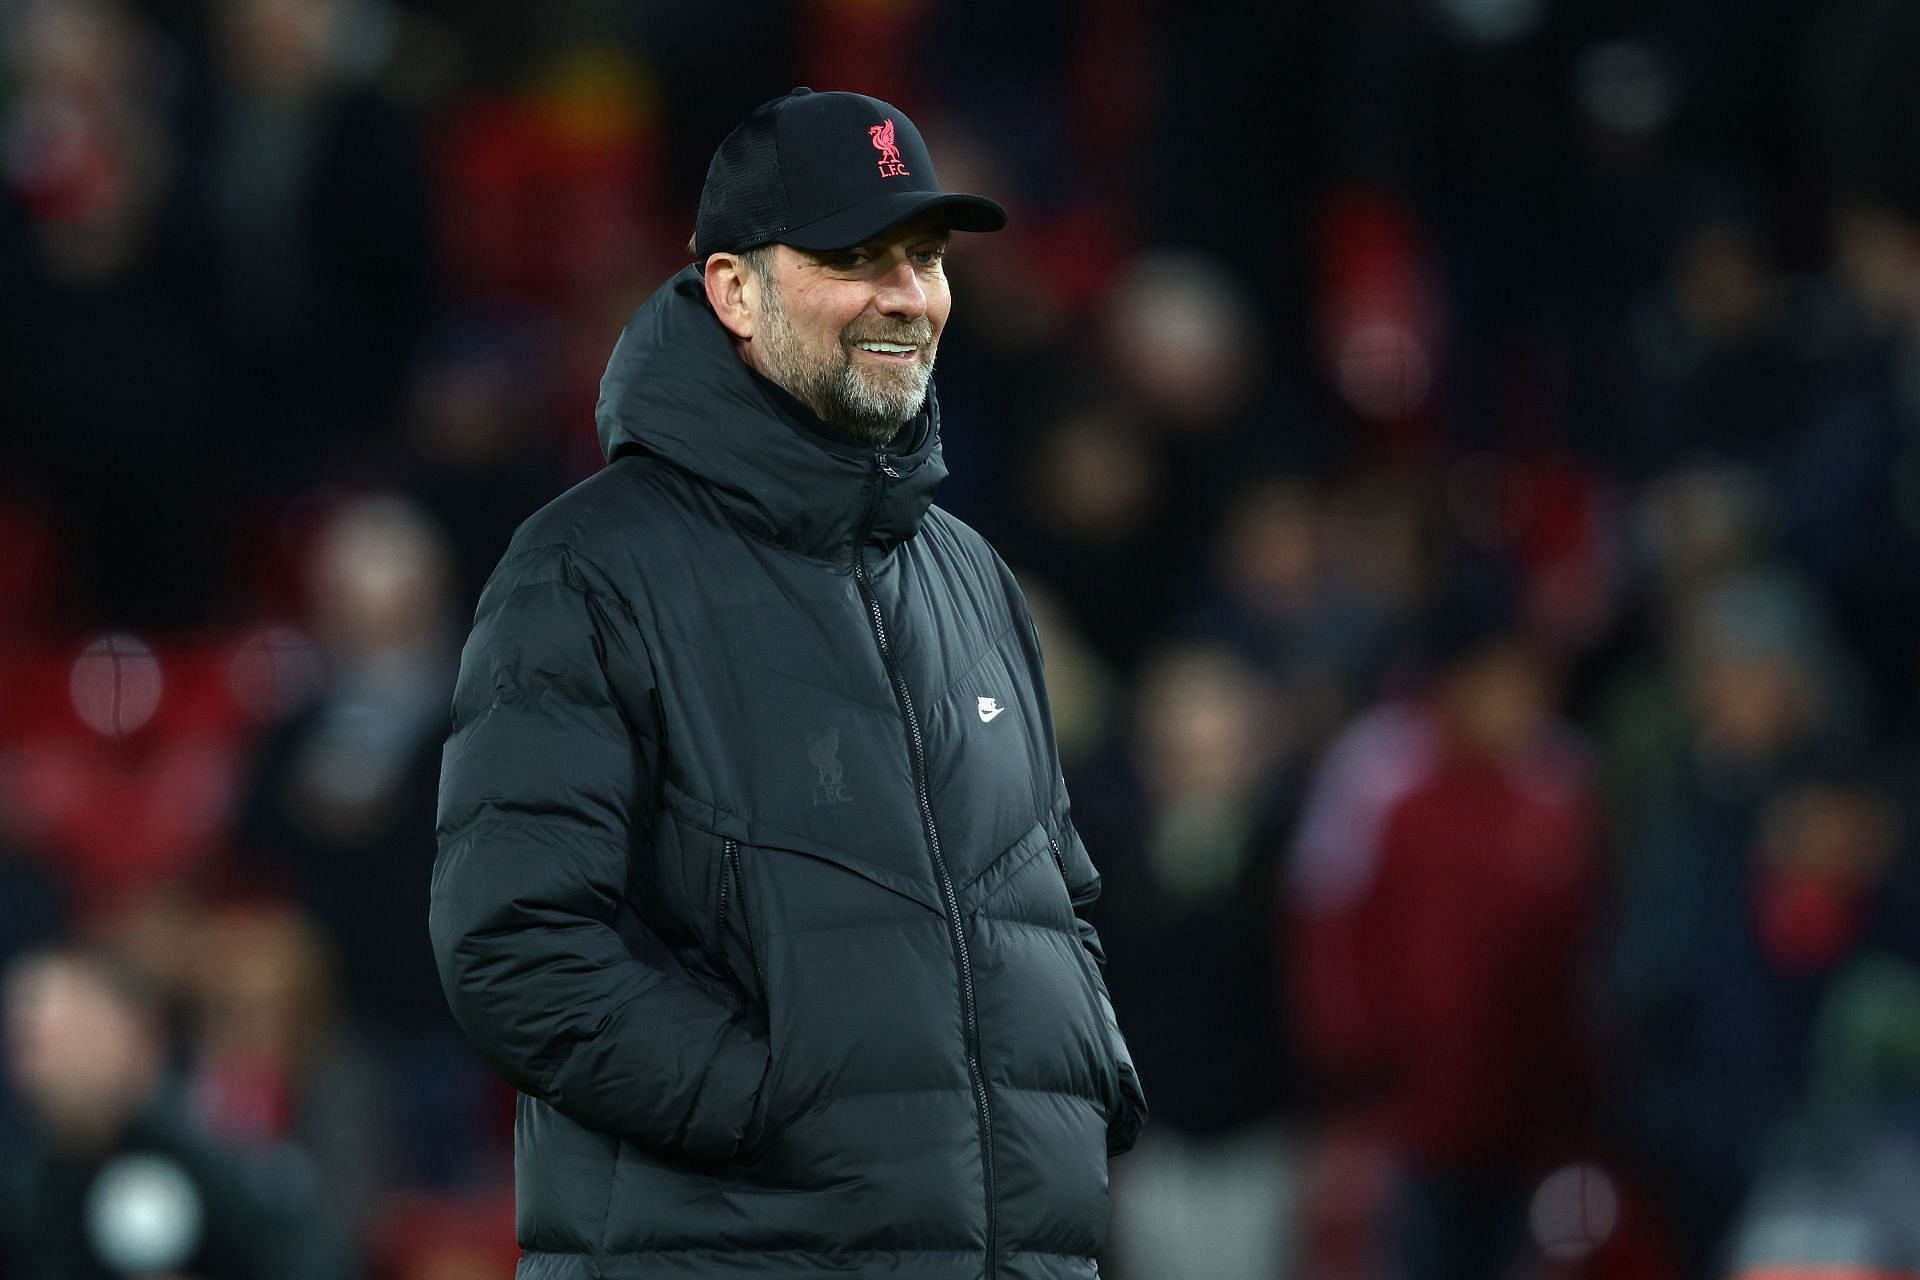 Jurgen Klopp will hope his side can close the gap on Manchester City